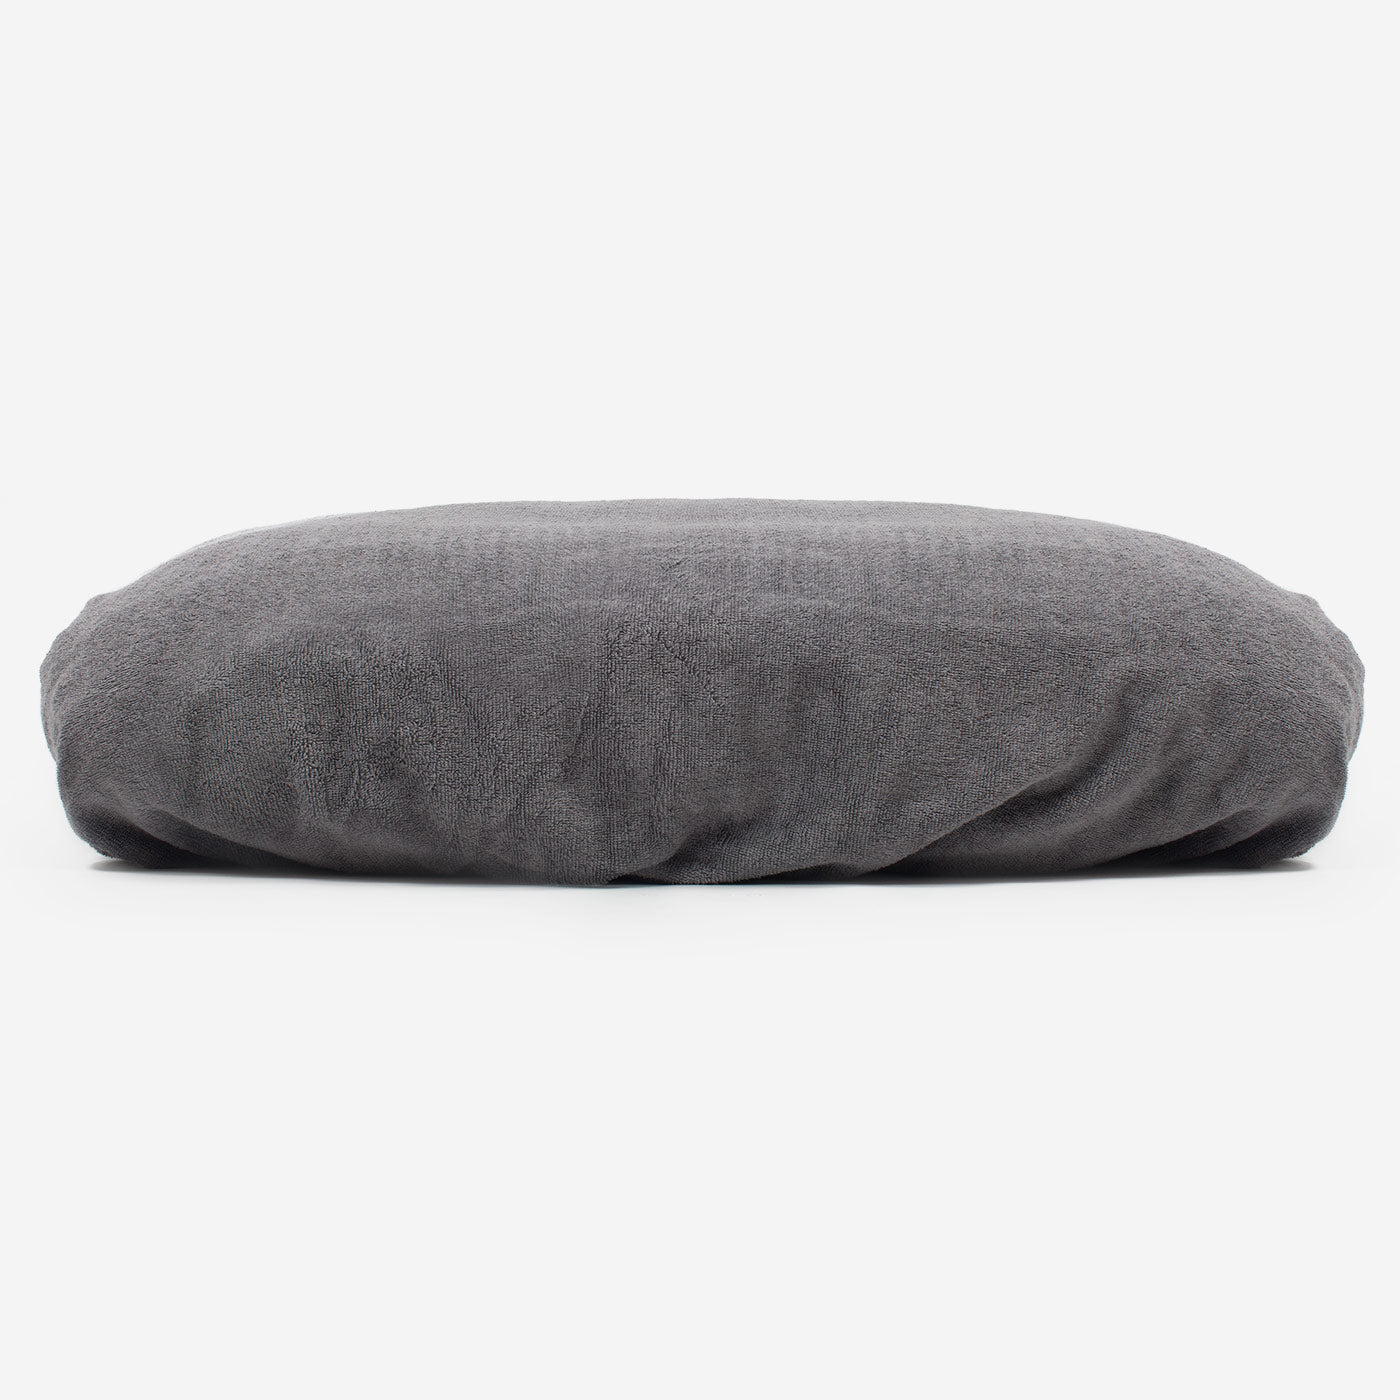 Introducing the ultimate bamboo dog drying cushion cover in beautiful Gun Metal, made from luxurious bamboo to aid sensitive skin featuring elasticated hem for a snug fit with super absorbent material for easy pet drying! Available now at Lords & Labradors US, In three sizes and four colors to suit all breeds!